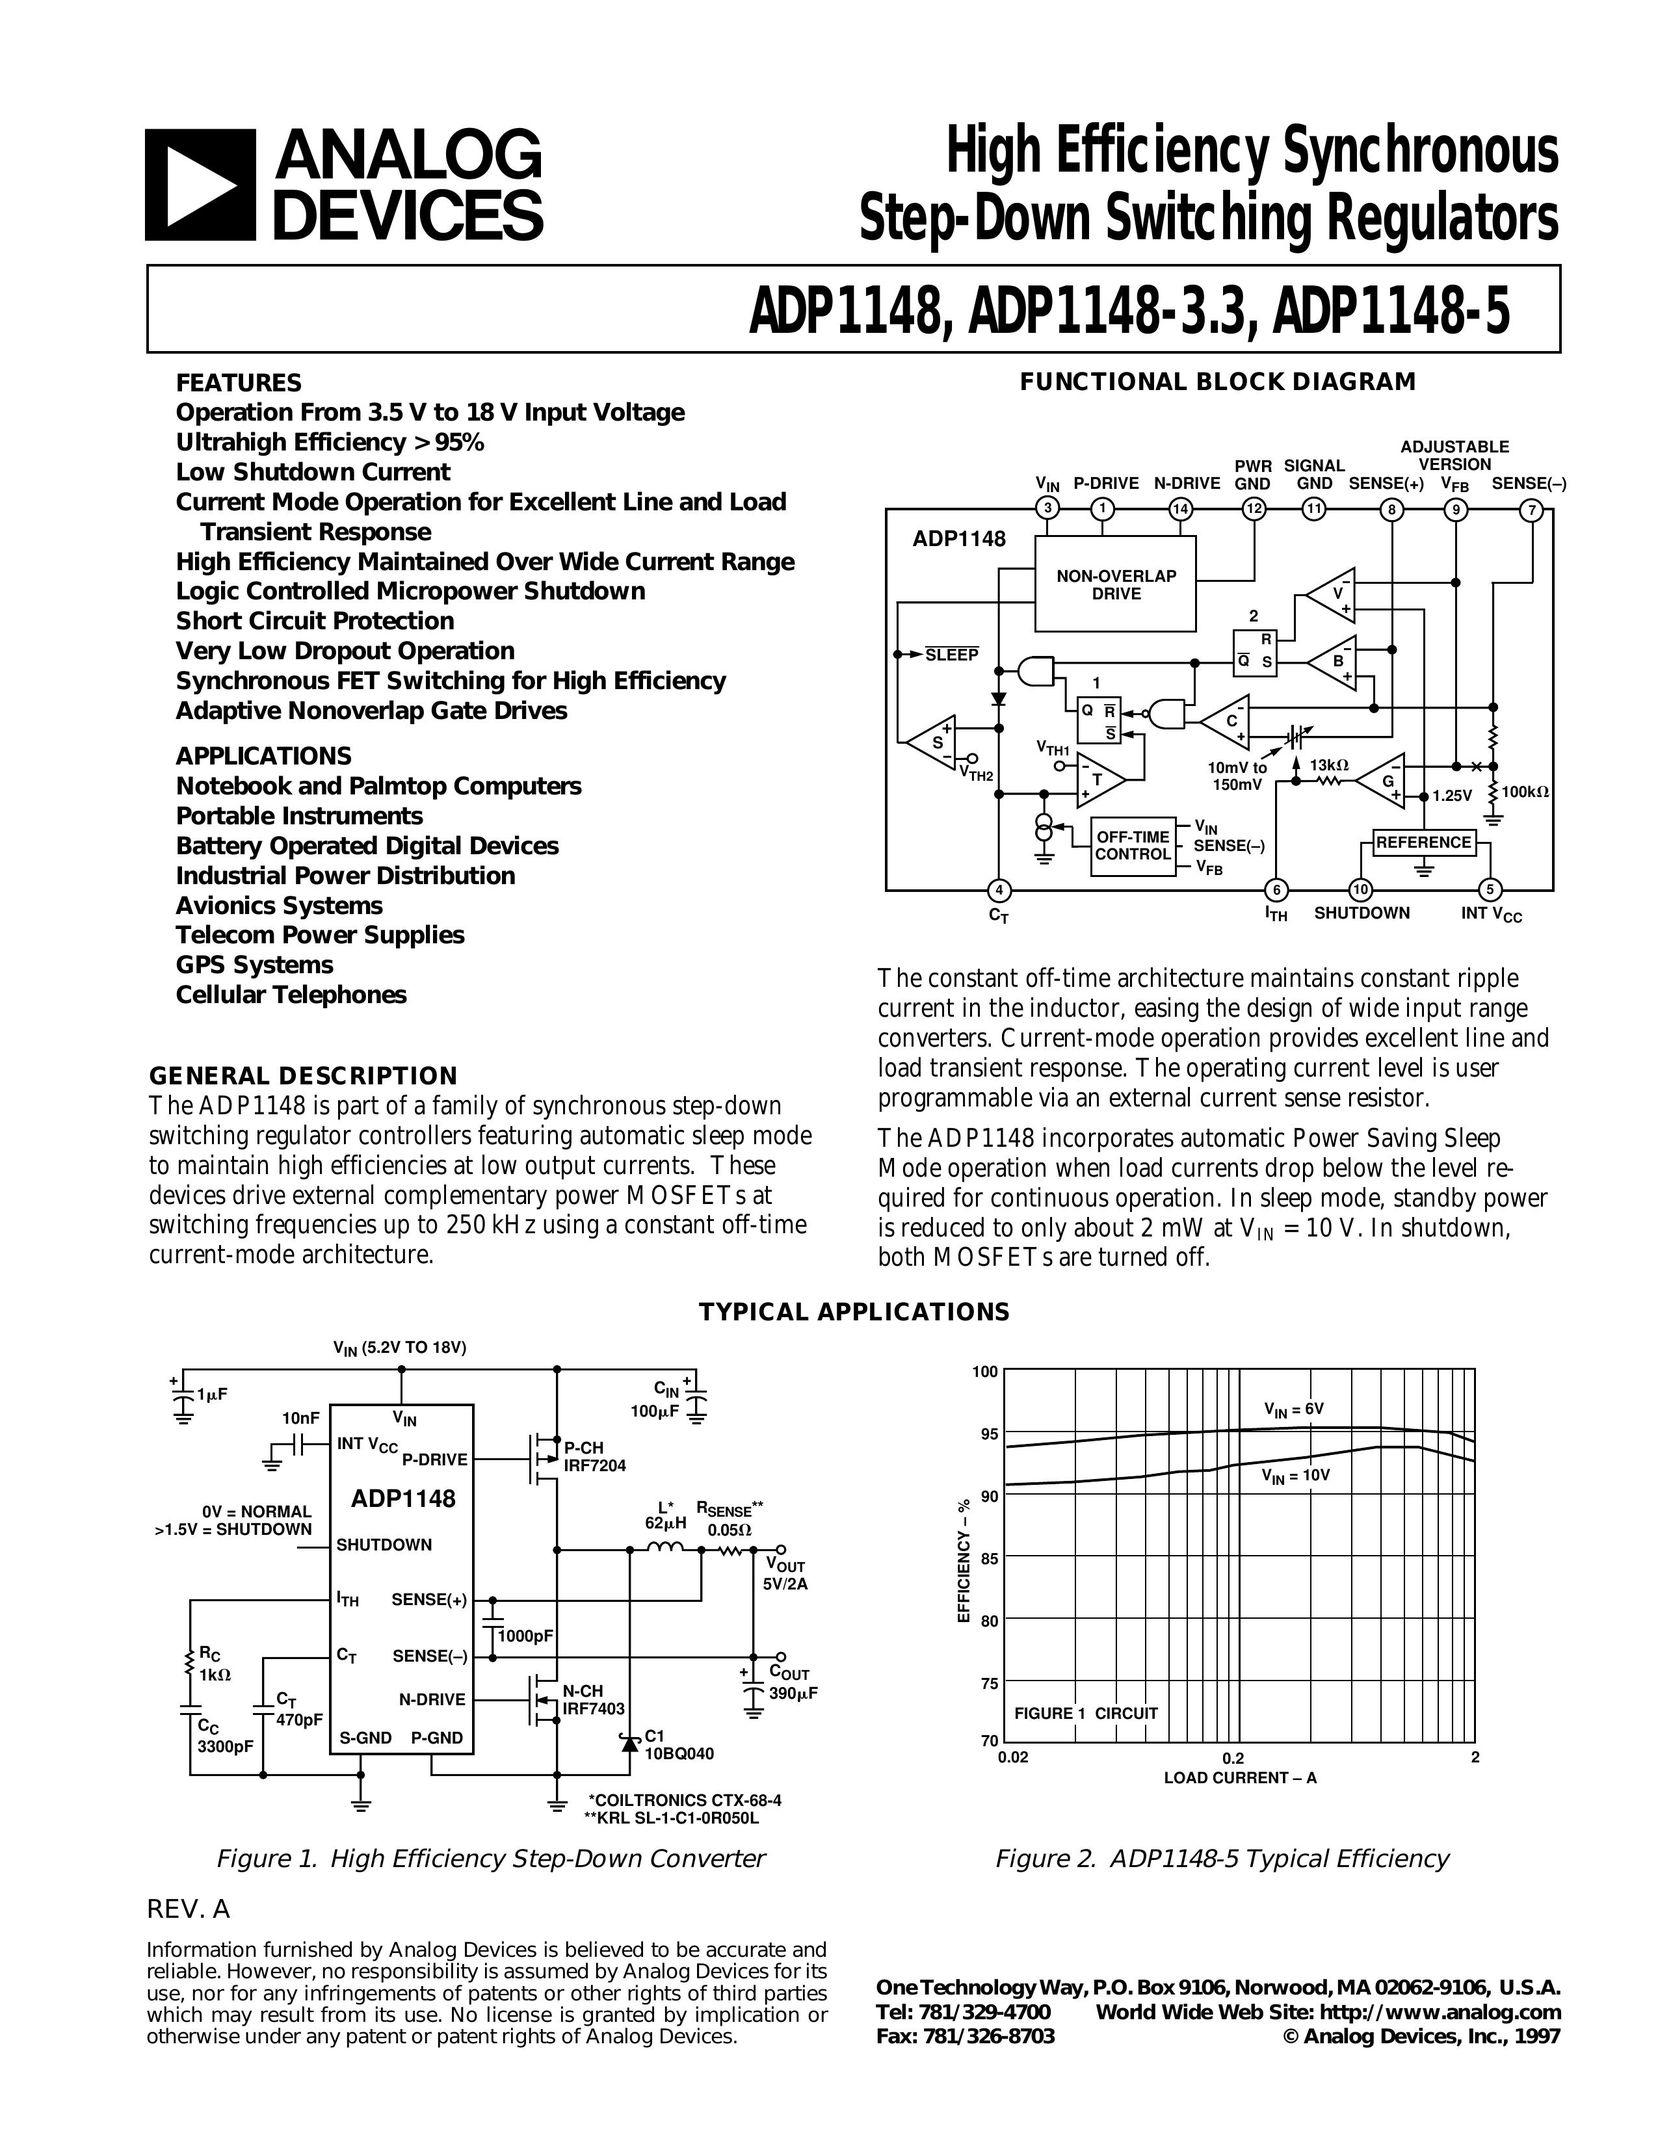 Analog Devices ADP1148-5 Clock User Manual